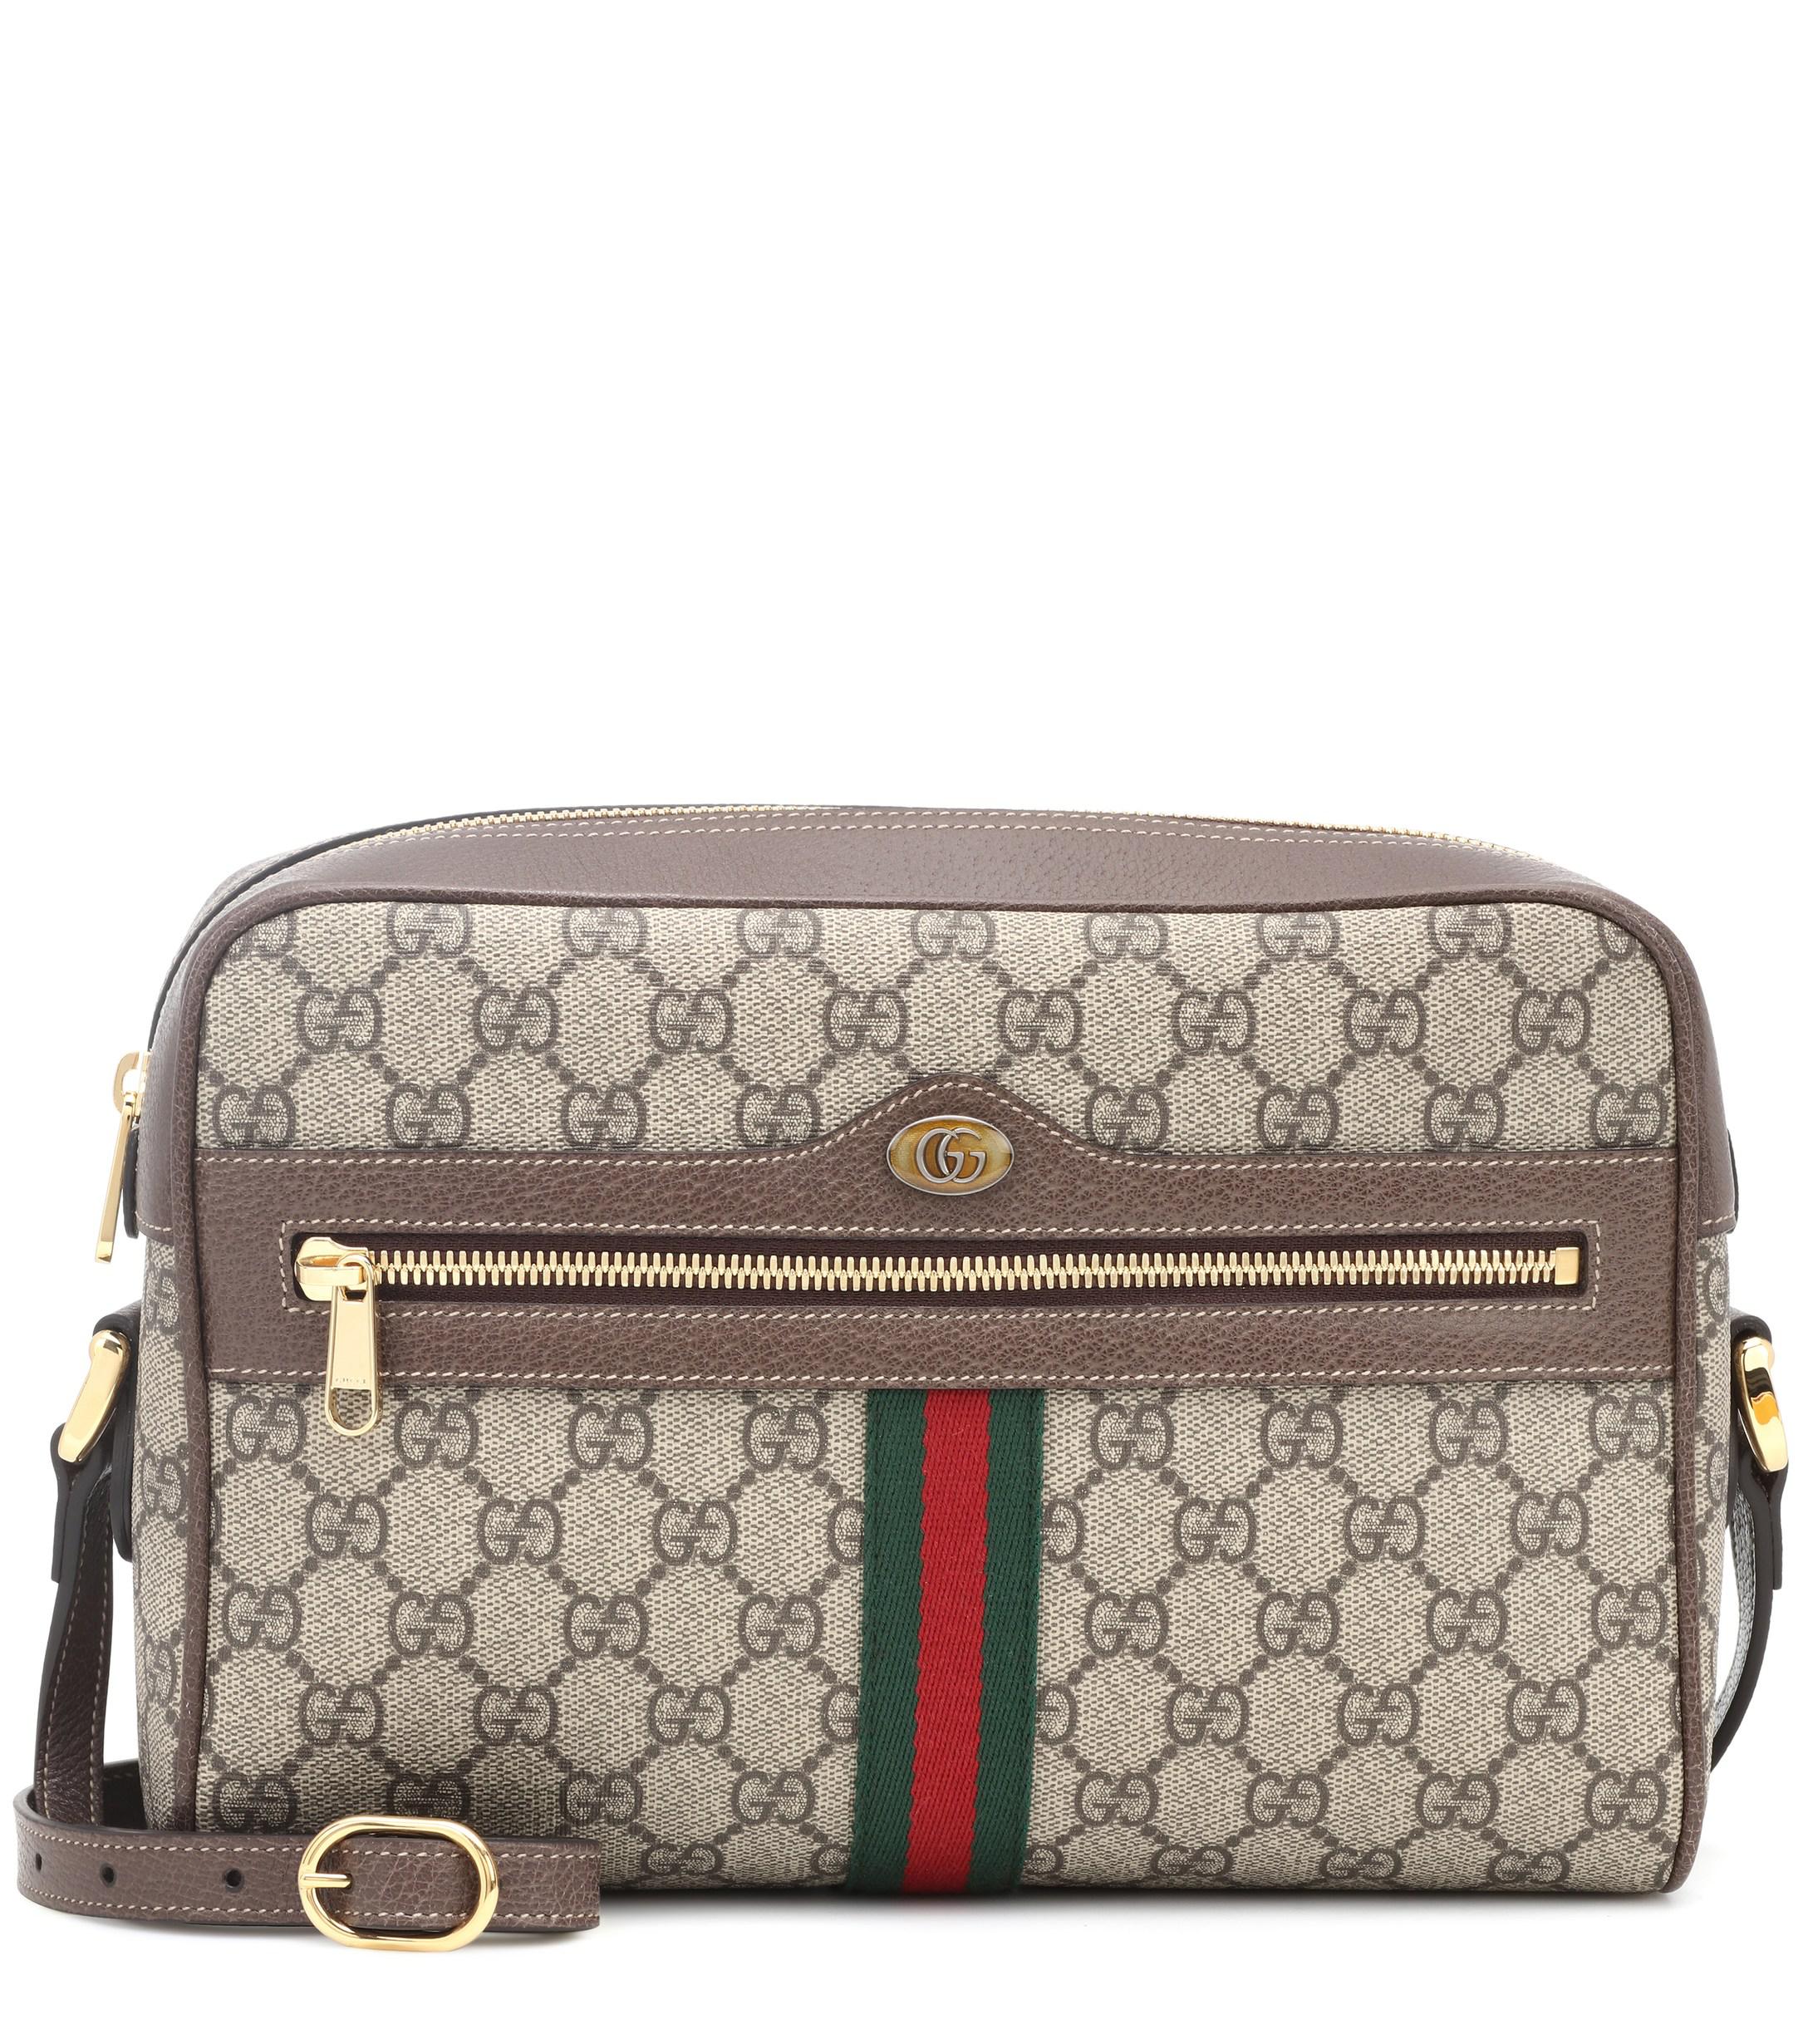 Gucci Canvas Ophidia Small GG Supreme Shoulder Bag in Light Beige